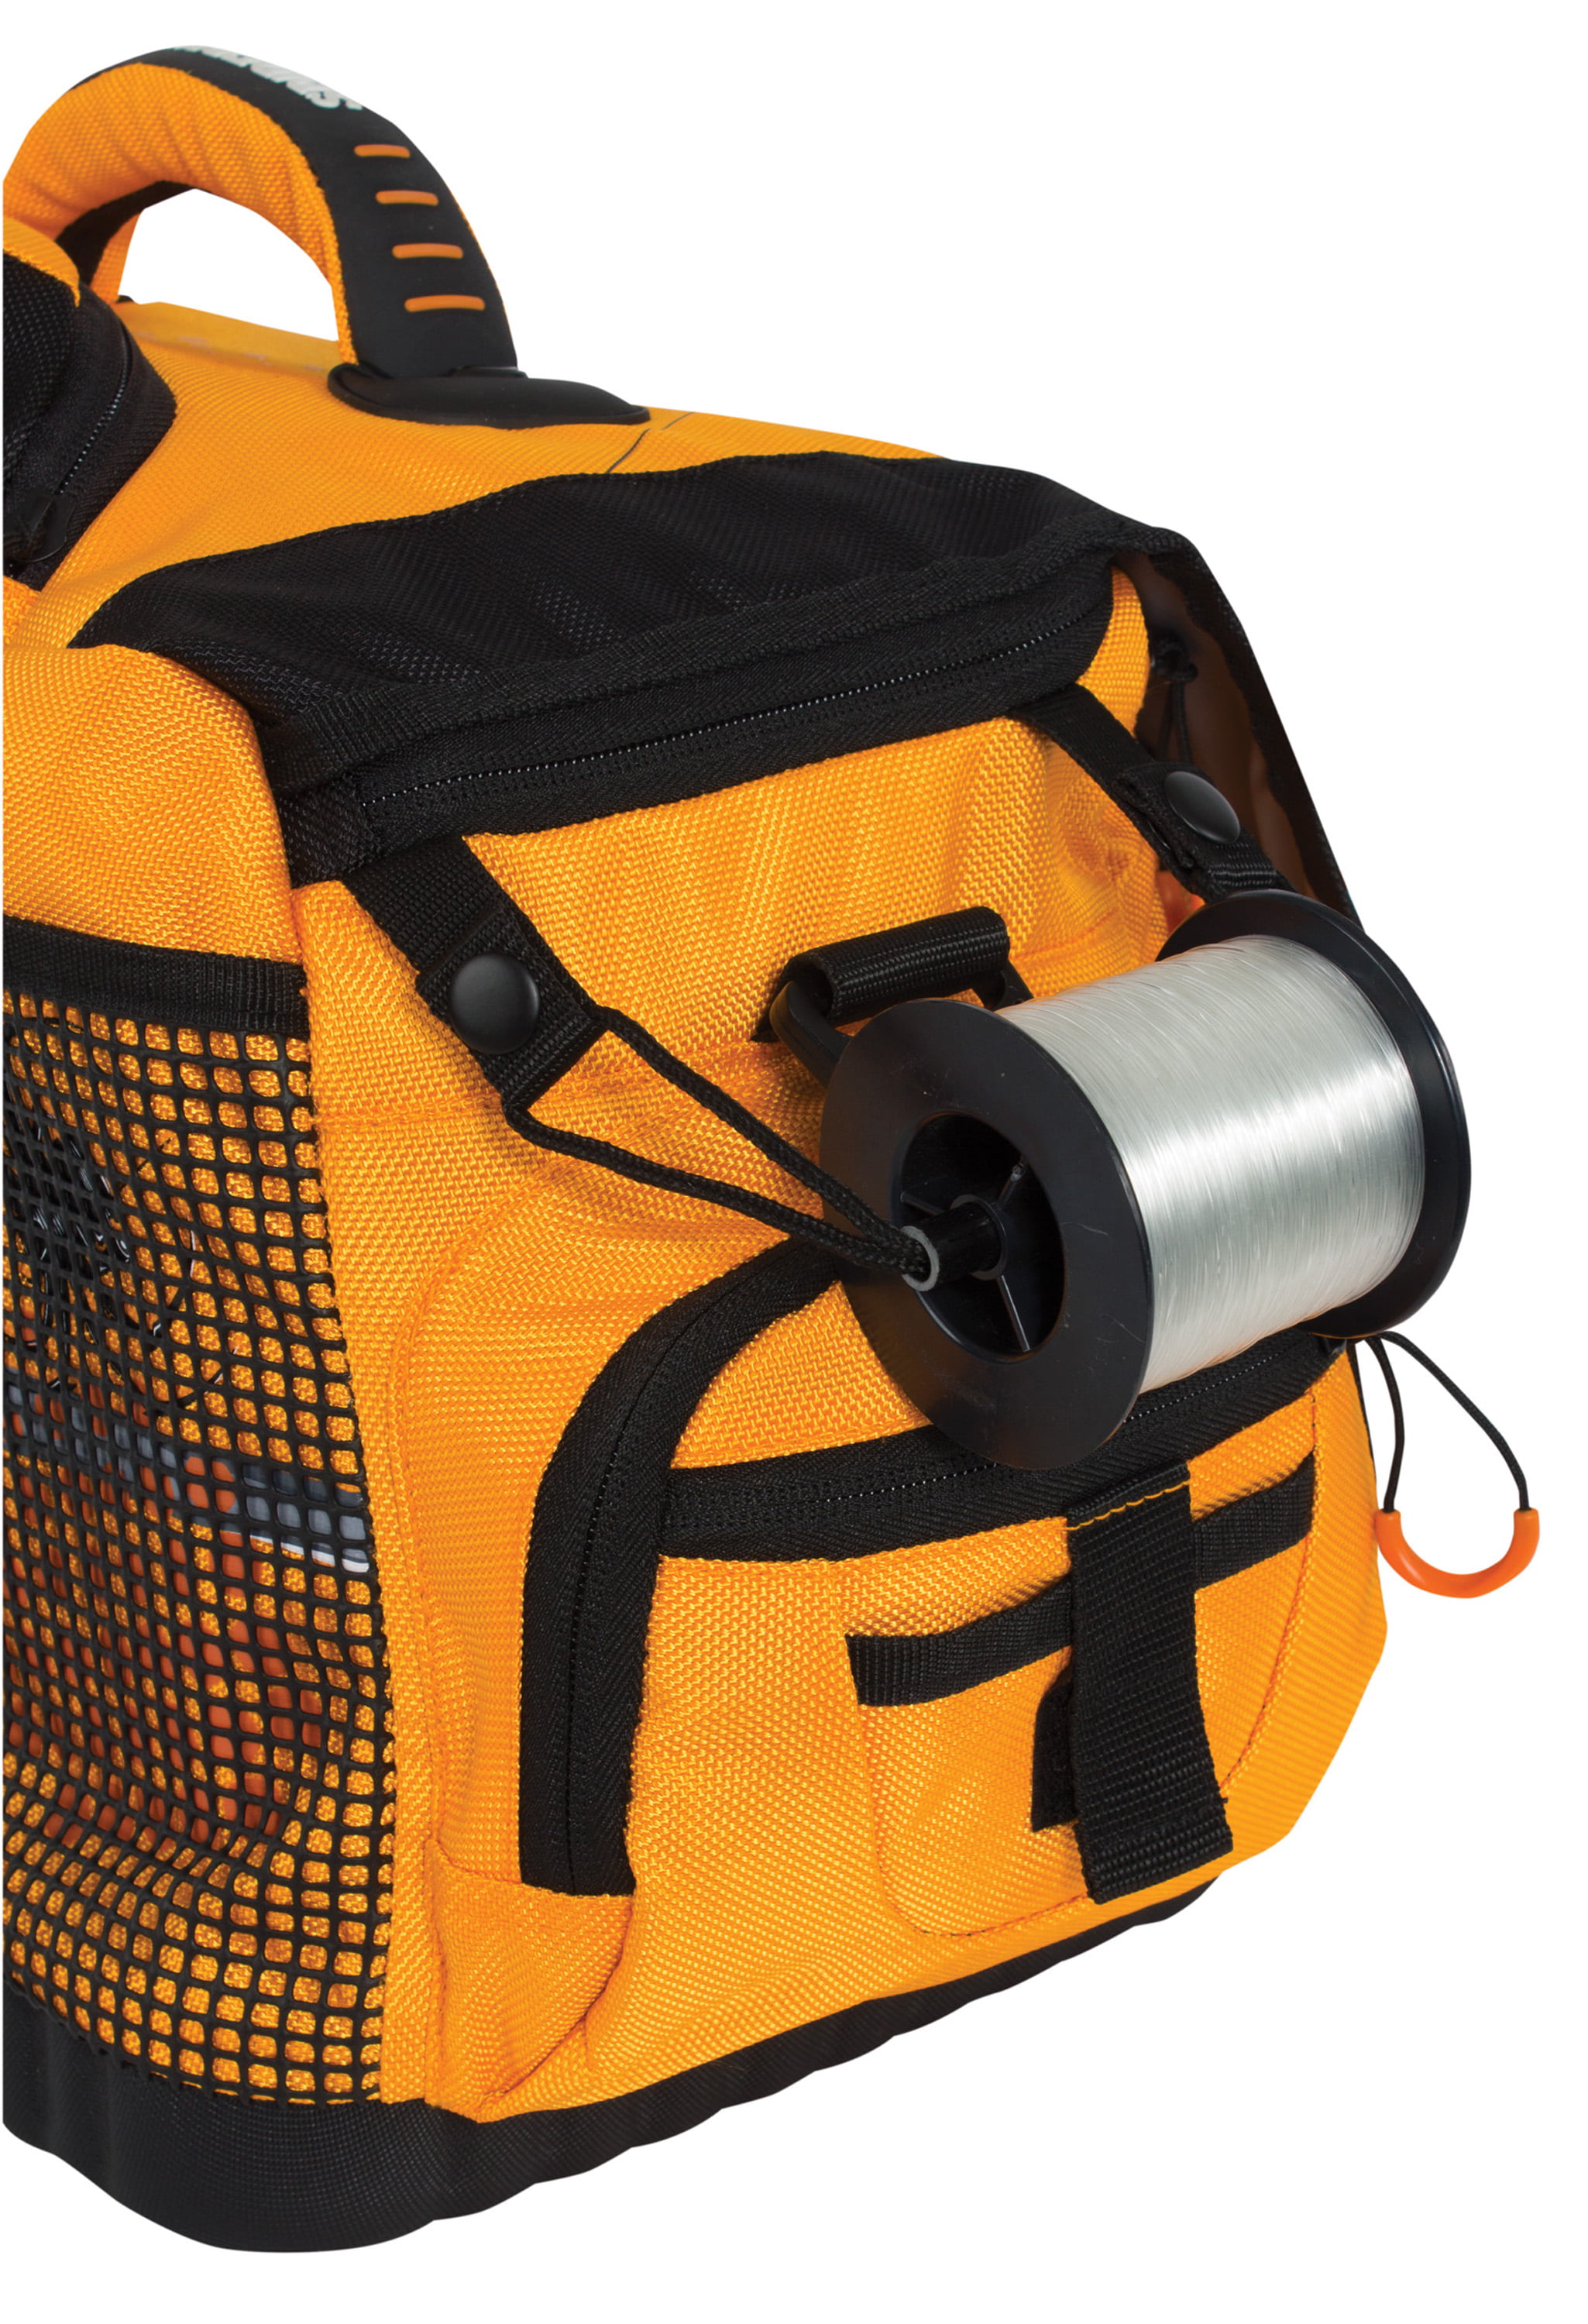 Spiderwire Soft Sided Fishing Tackle Bag with 4 Large Utility Lure 